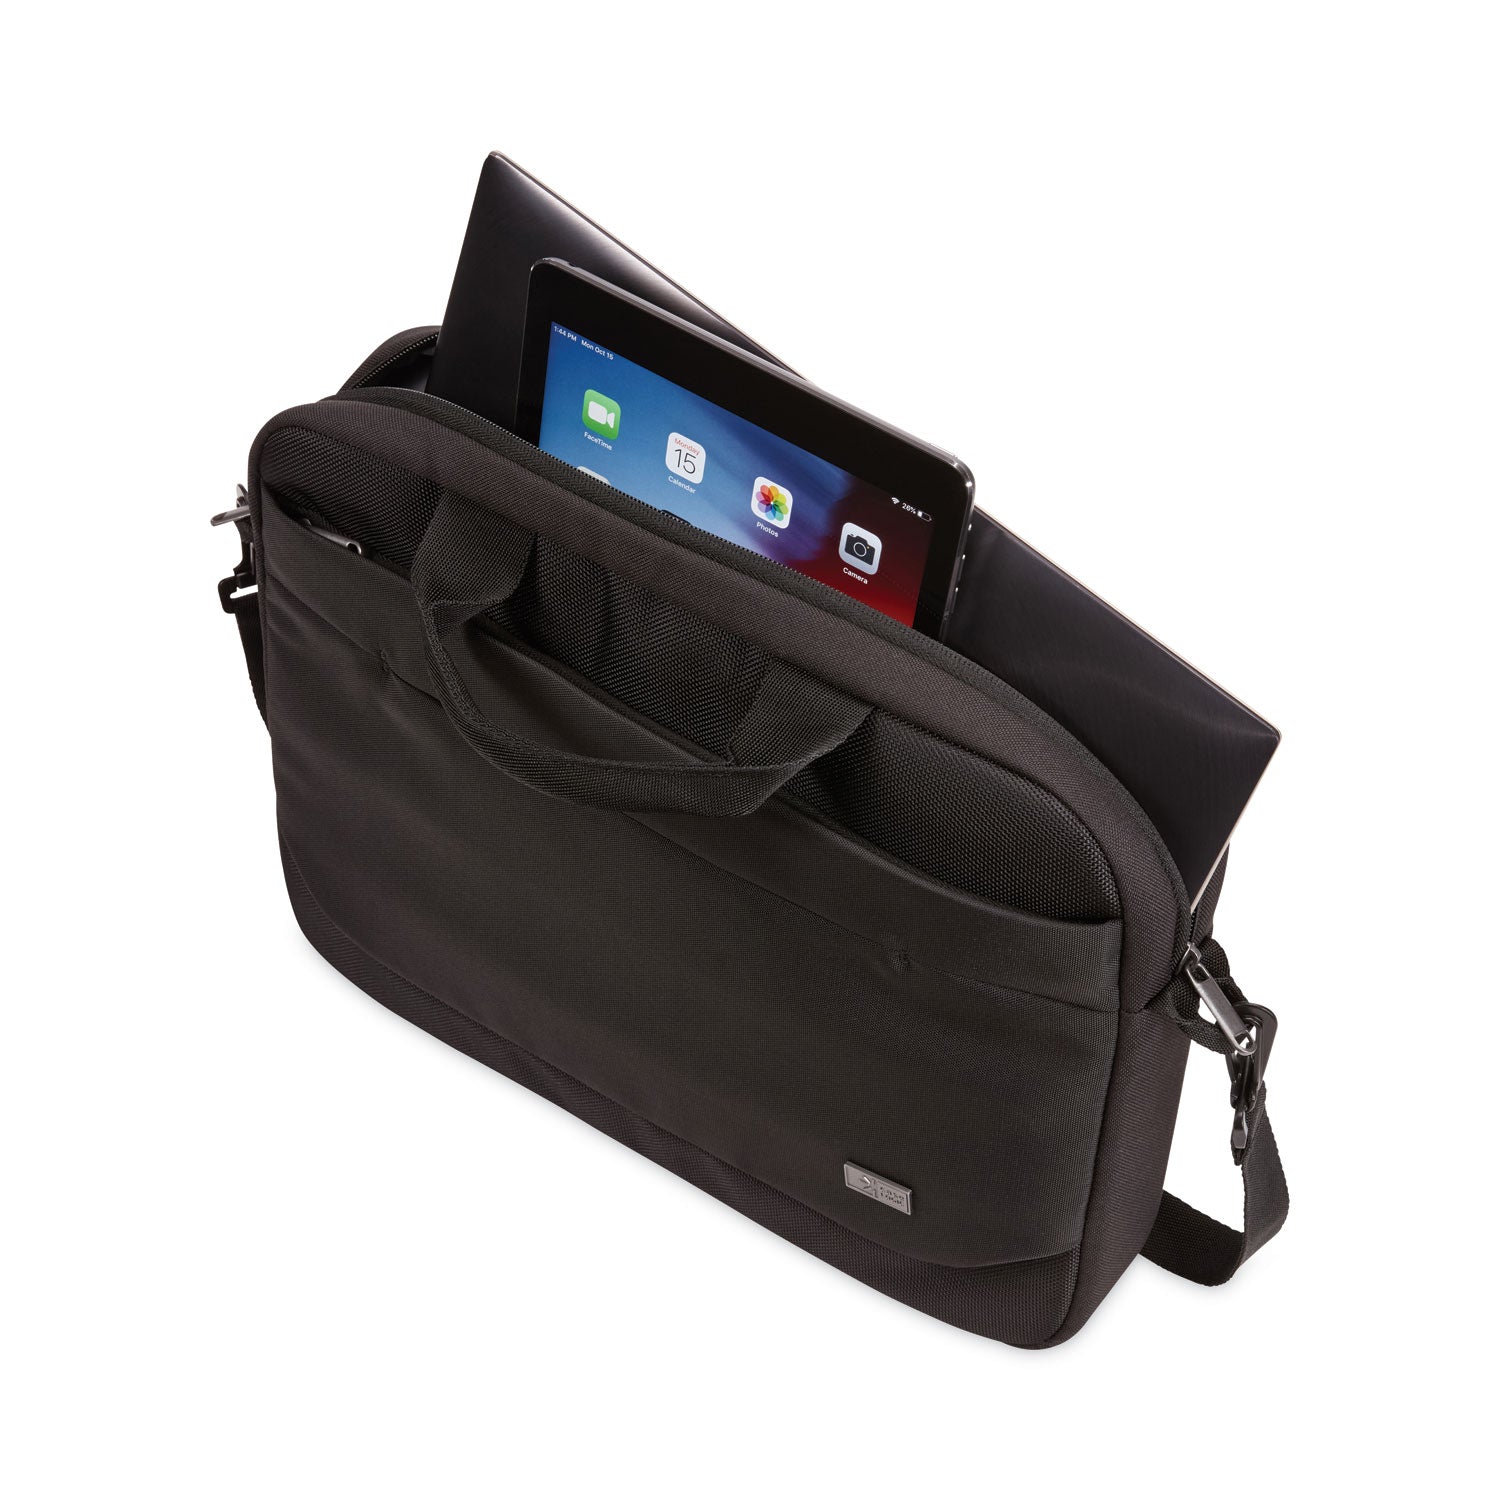 advantage-laptop-attache-fits-devices-up-to-14-polyester-146-x-28-x-13-black_clg3203986 - 4